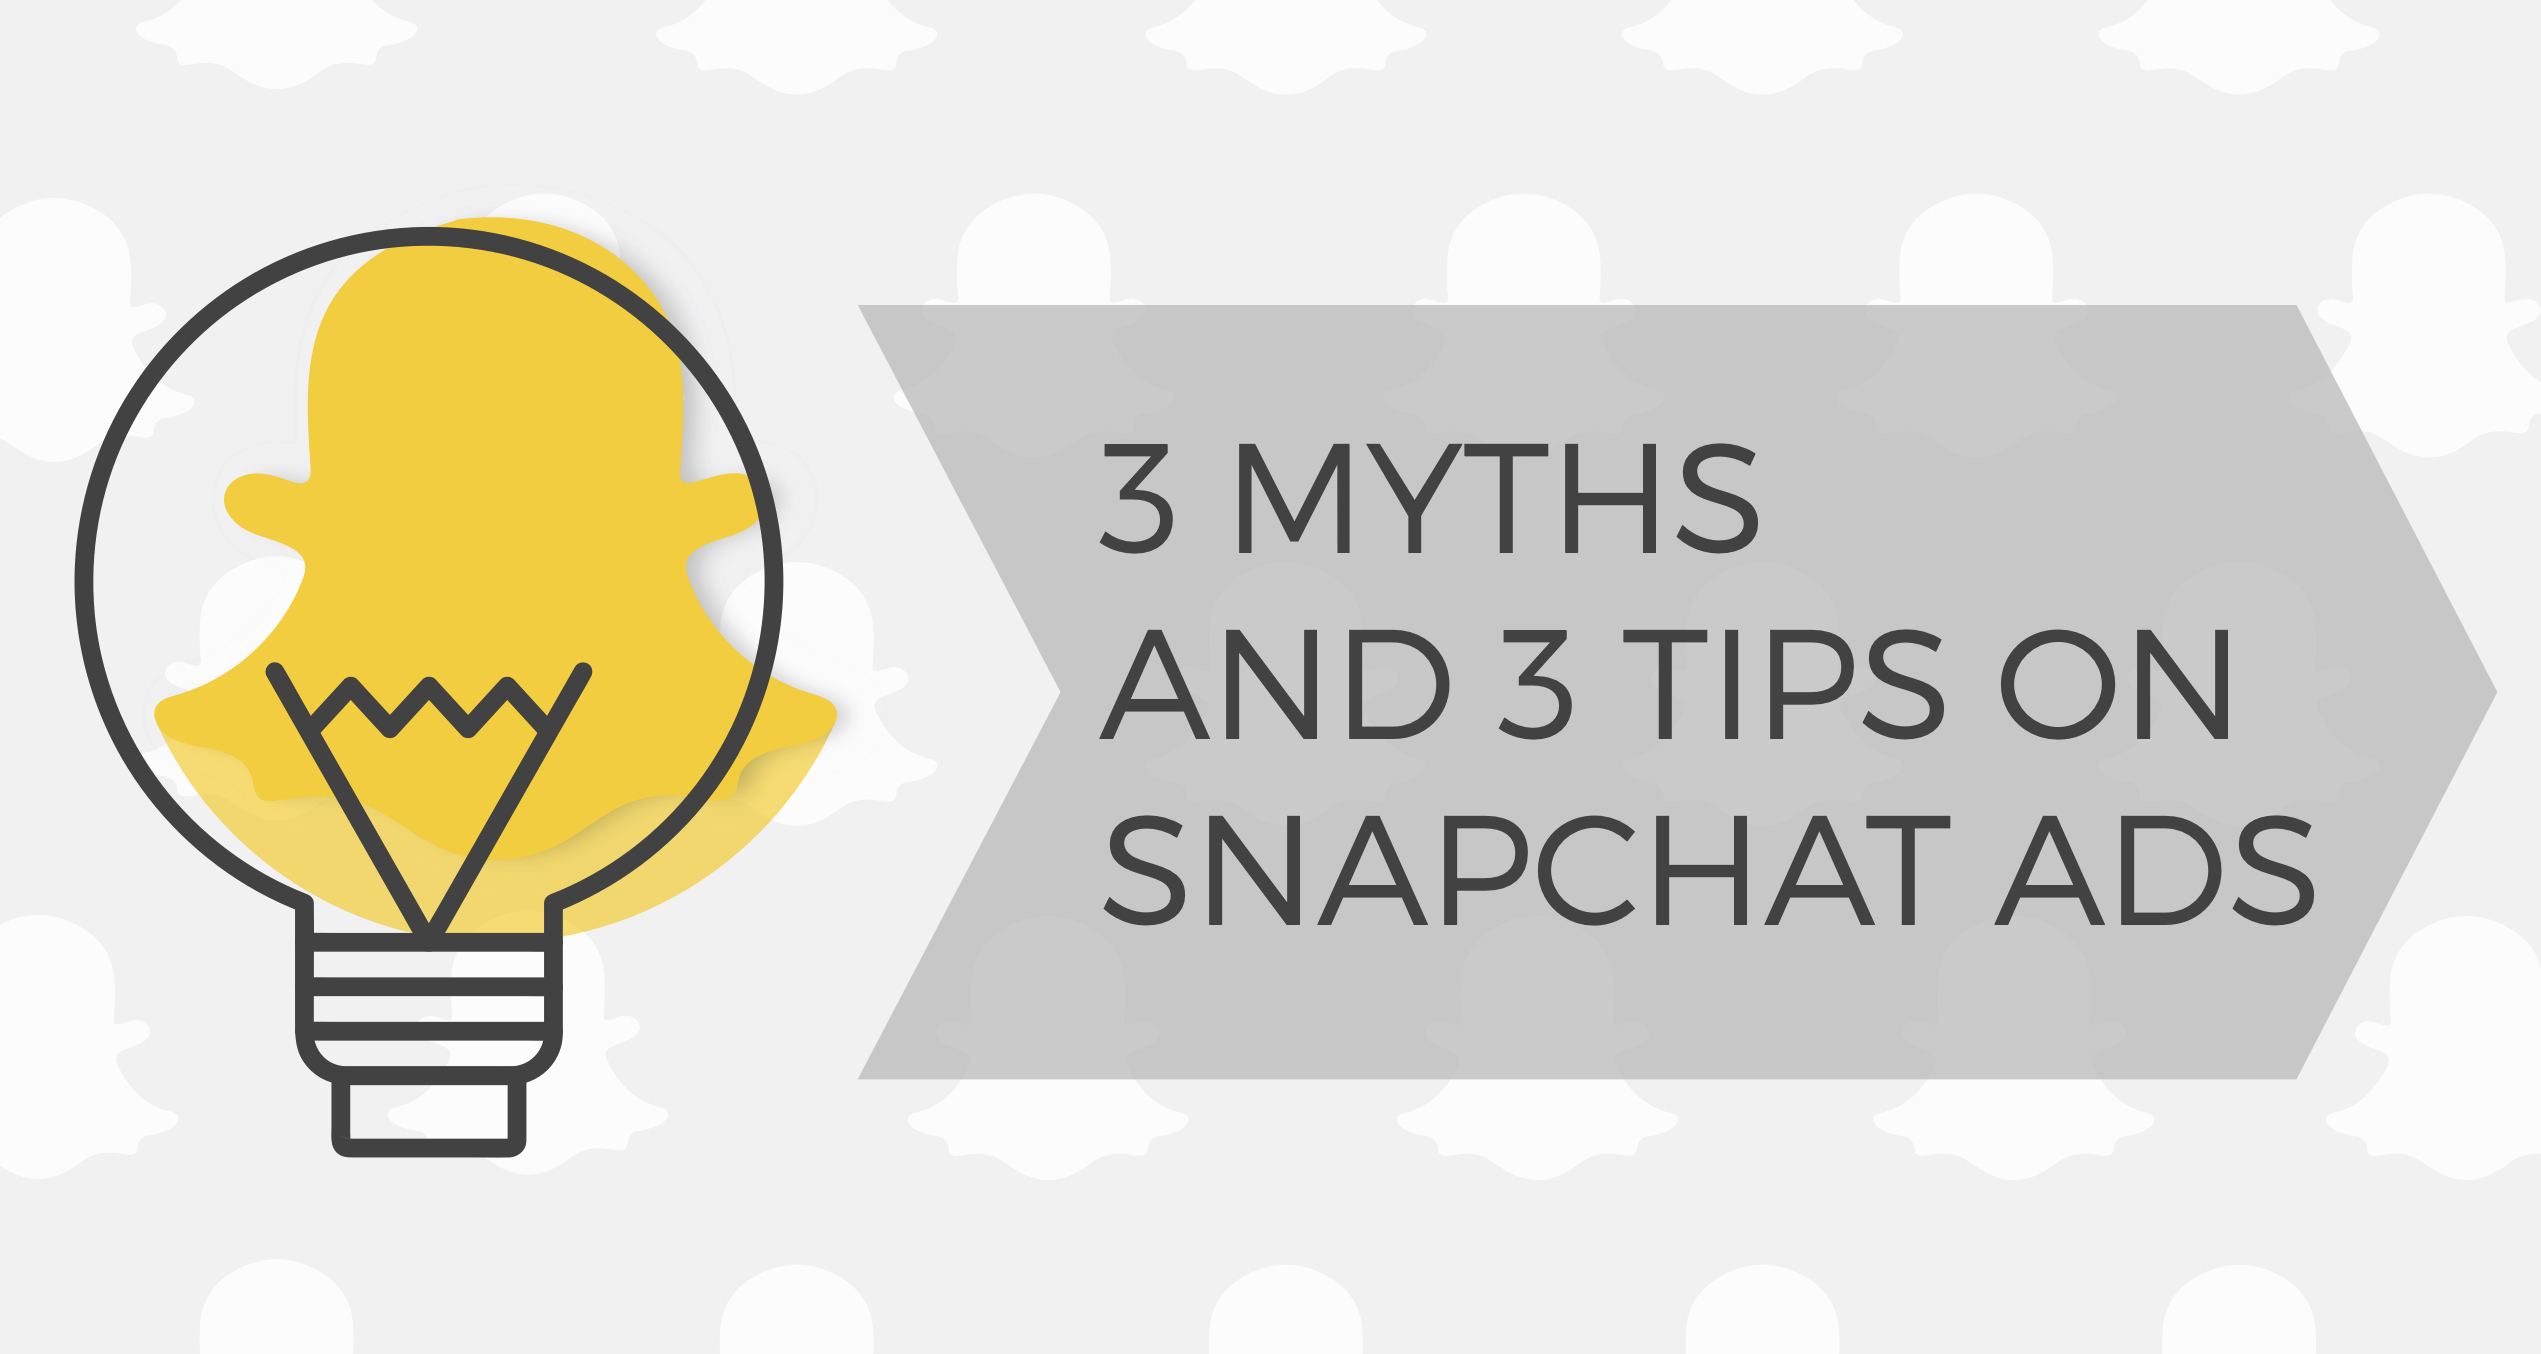 3 Myths and 3 Tips on Snapchat Ads